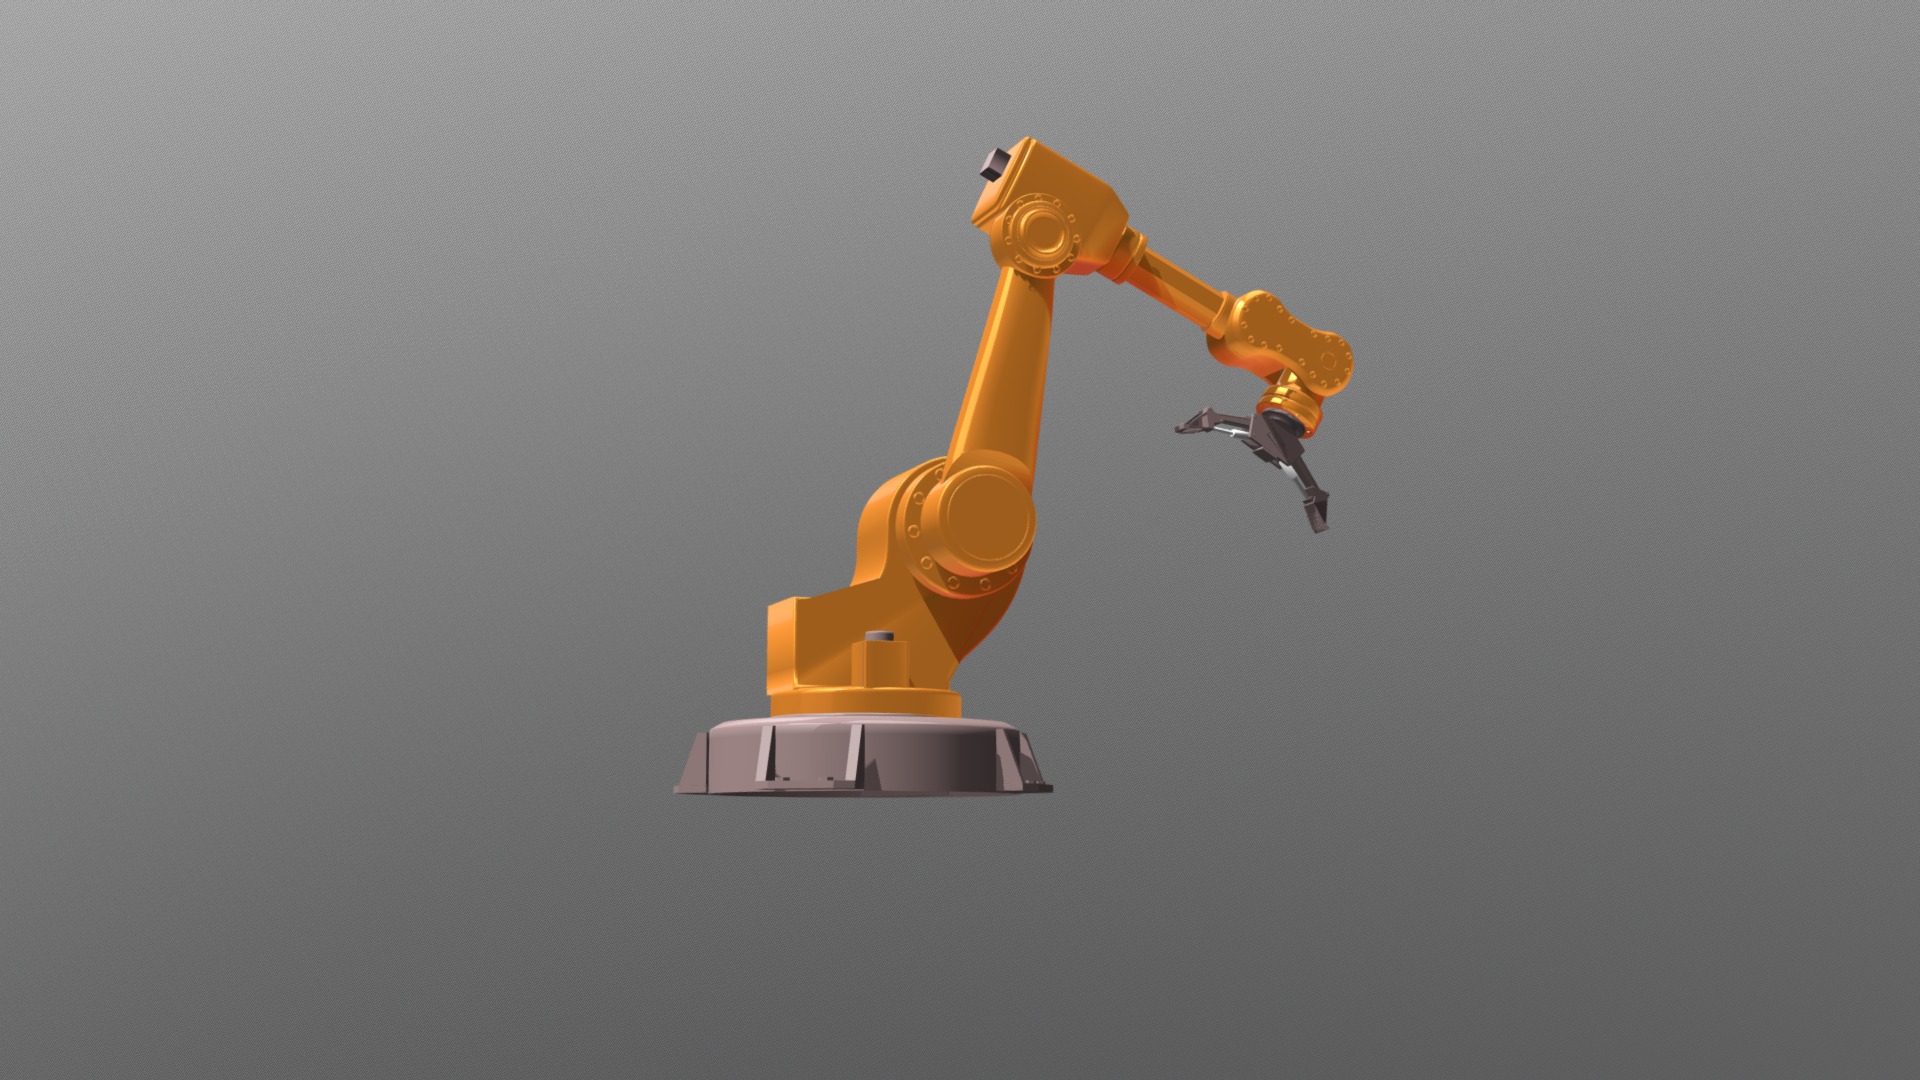 A robotic arm like those used in industrial factories 3d model